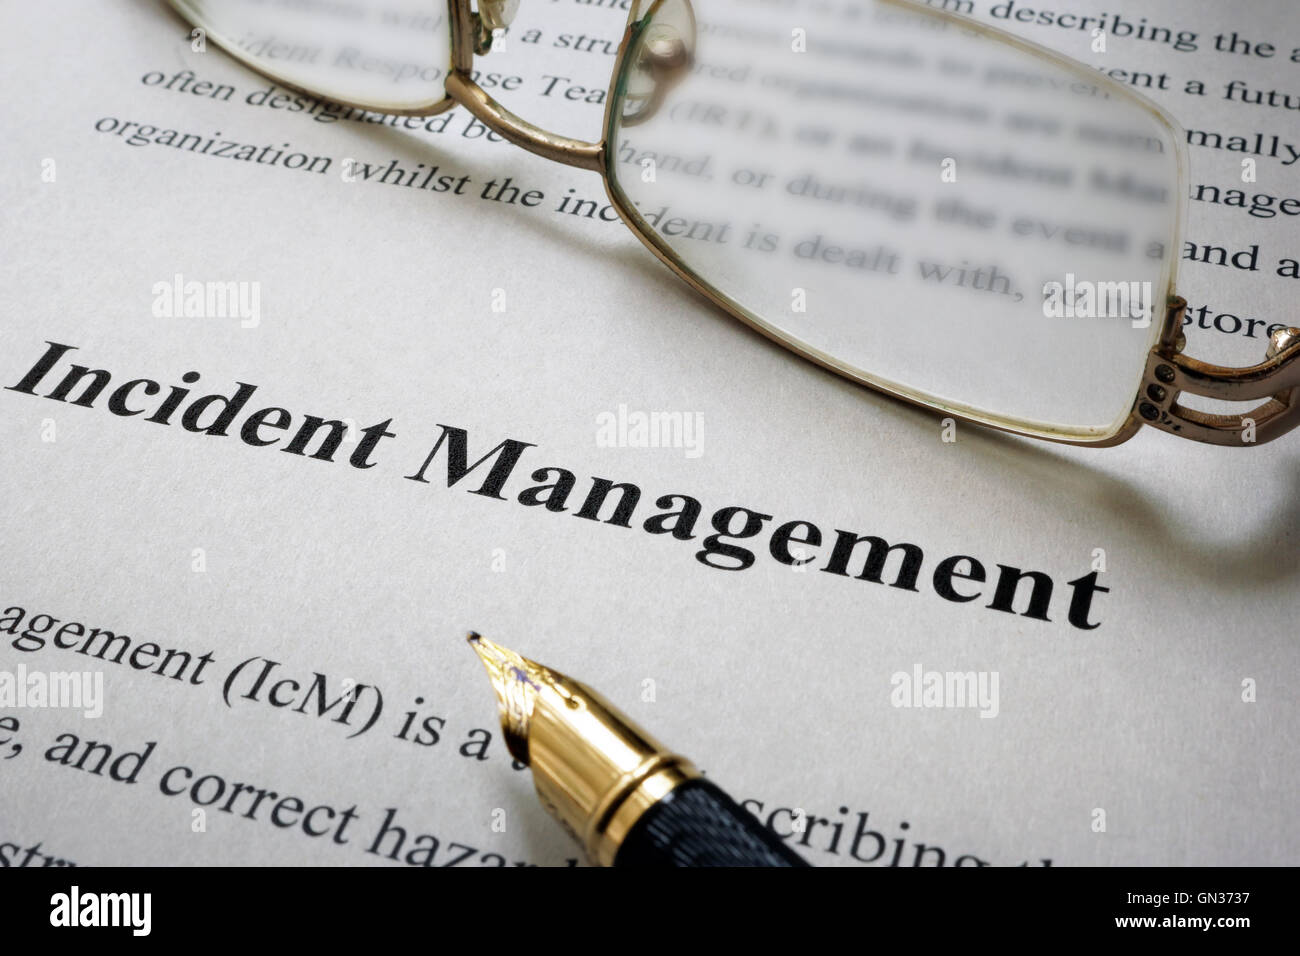 Page of paper with words Incident Management and glasses. Stock Photo